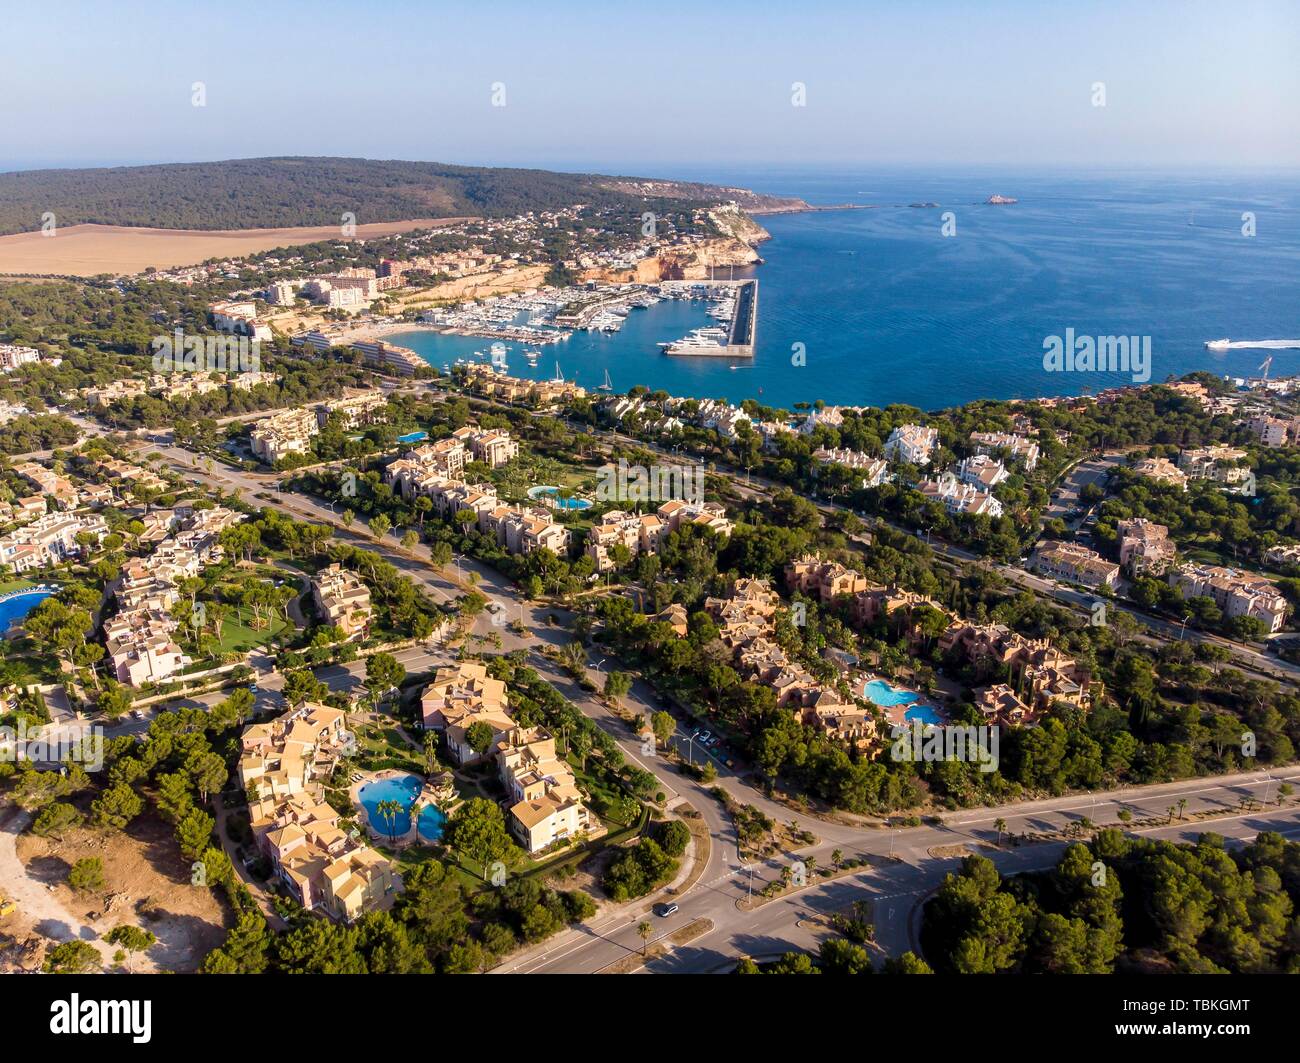 Aerial view, view over Santa Ponca with villas to the marina Port Adriano, Majorca, Balearic Islands, Spain Stock Photo